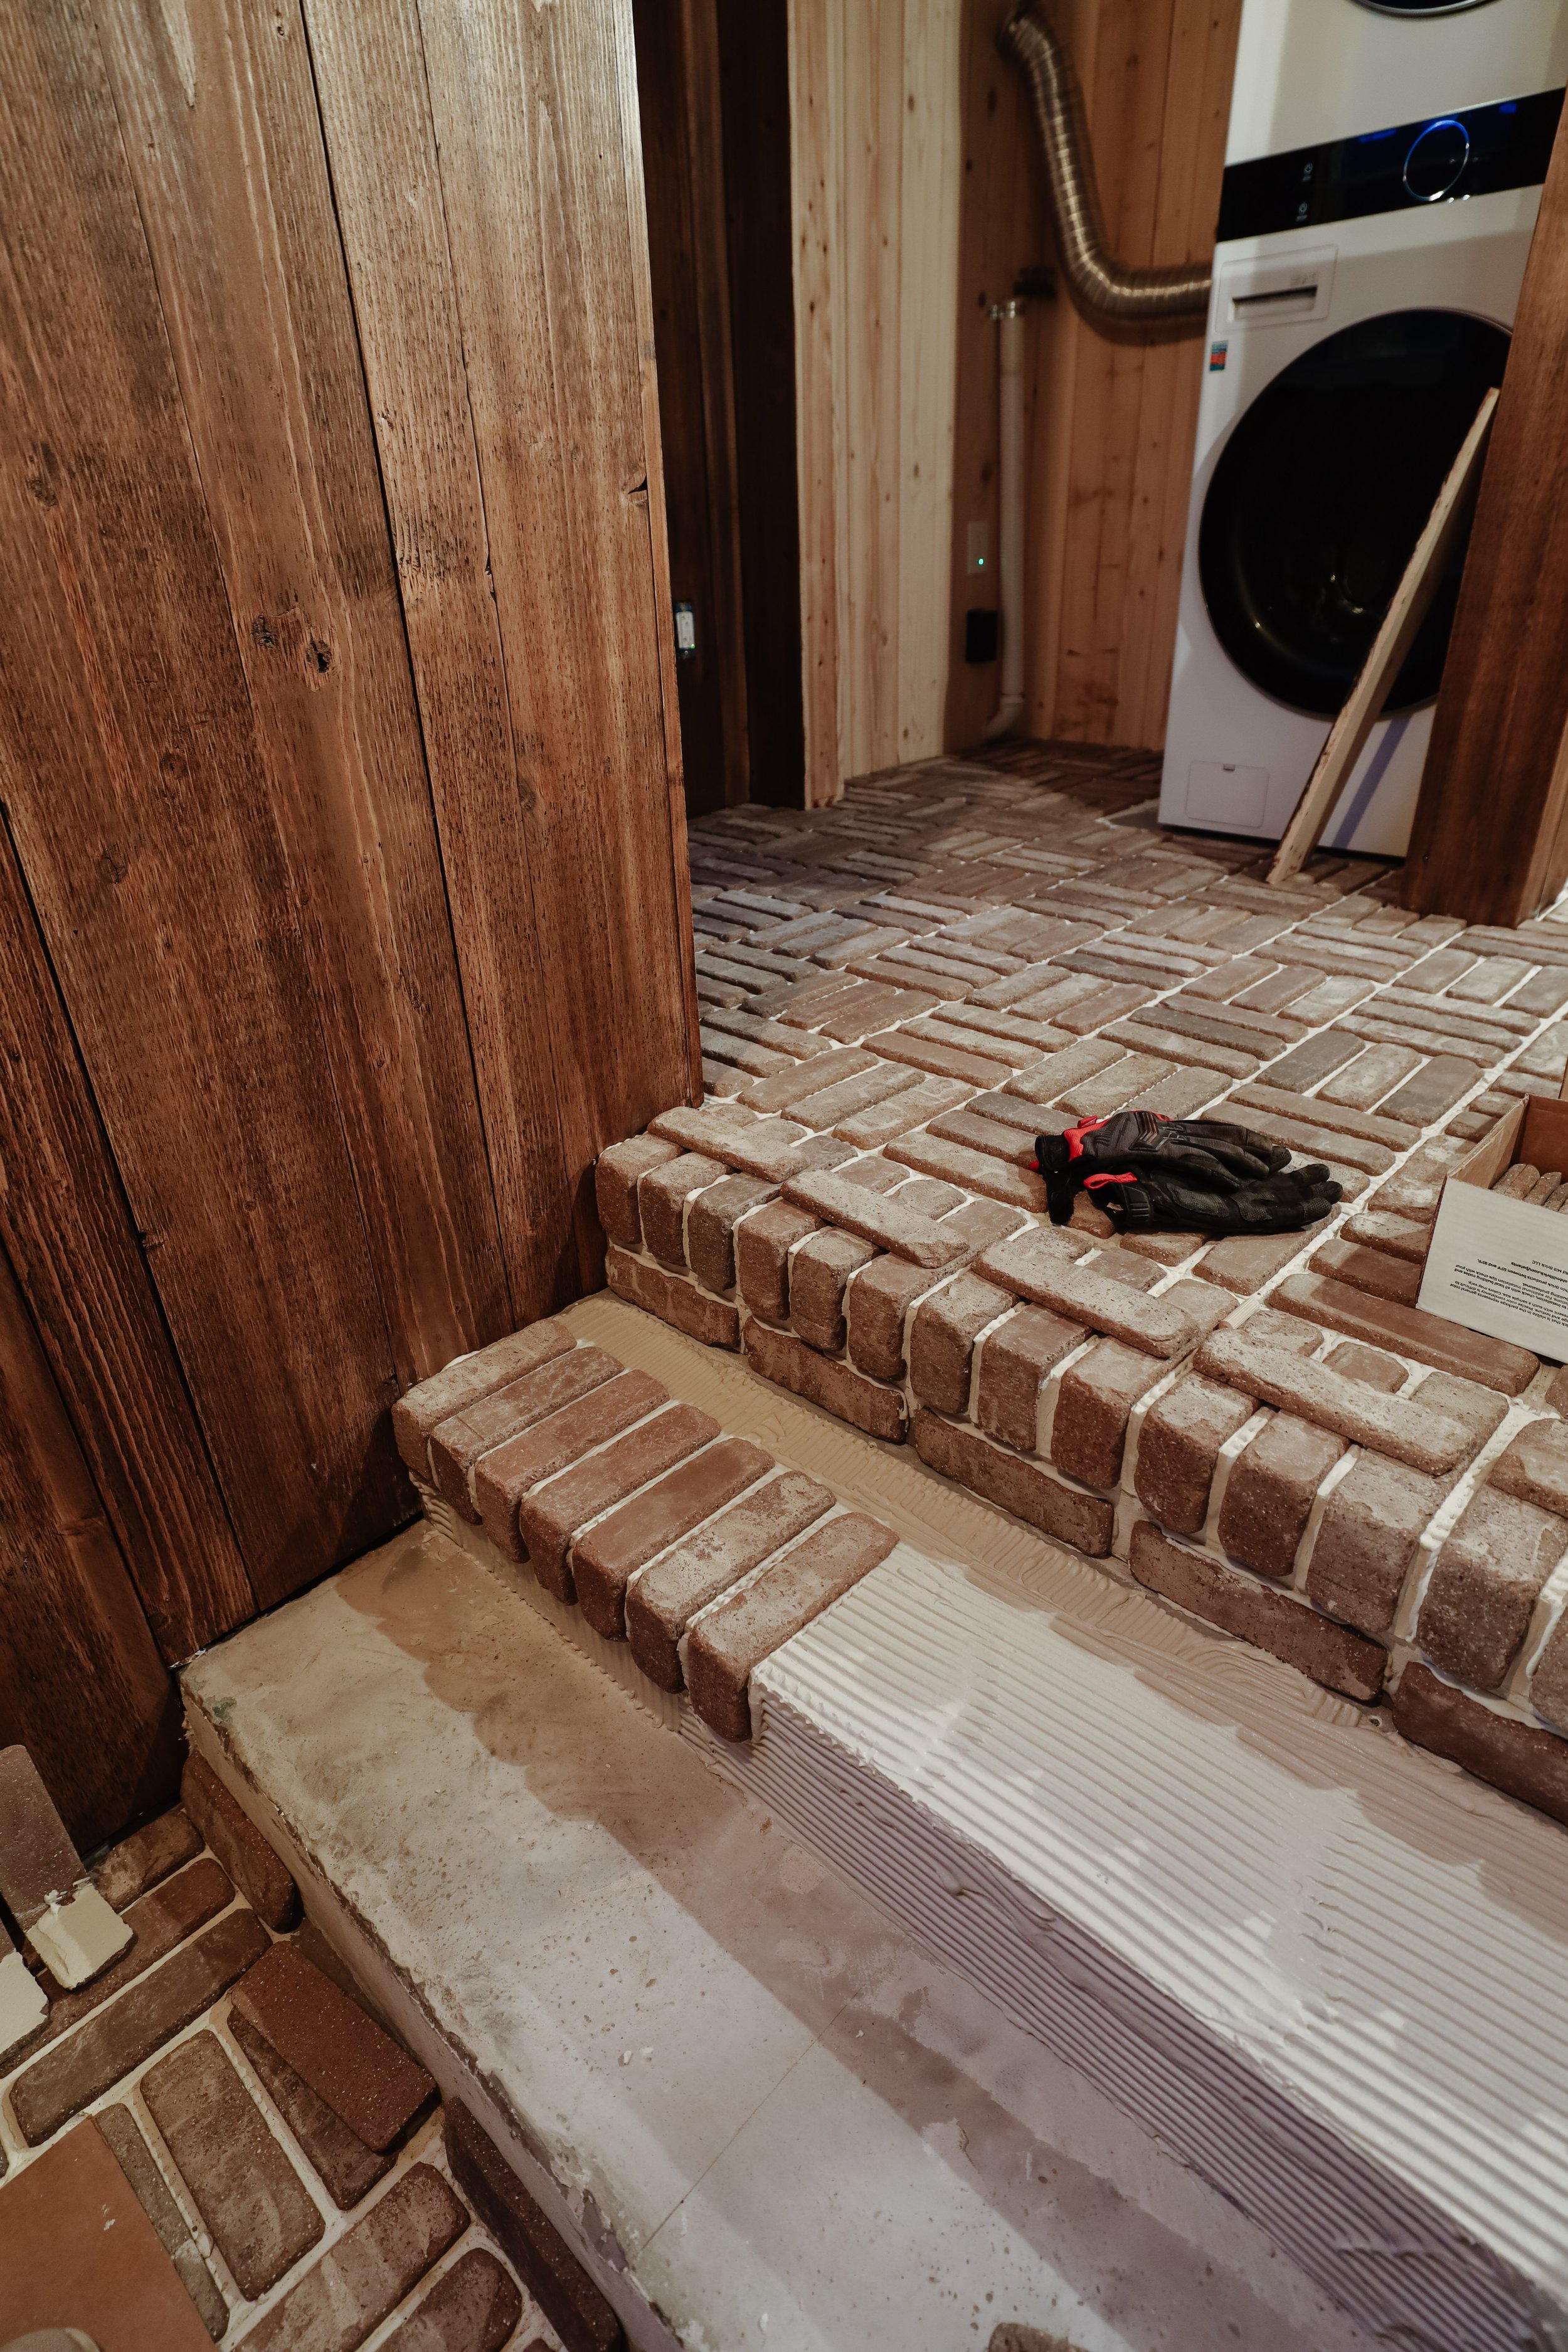 How to install interior thin brick veneer floors. How to install bricks in a basketweave pattern. Laundry room and mudroom brick floor. Tumbled brick flooring. Old world brick floors inside. DIY brick floor installation for beginners. | Nadine Stay